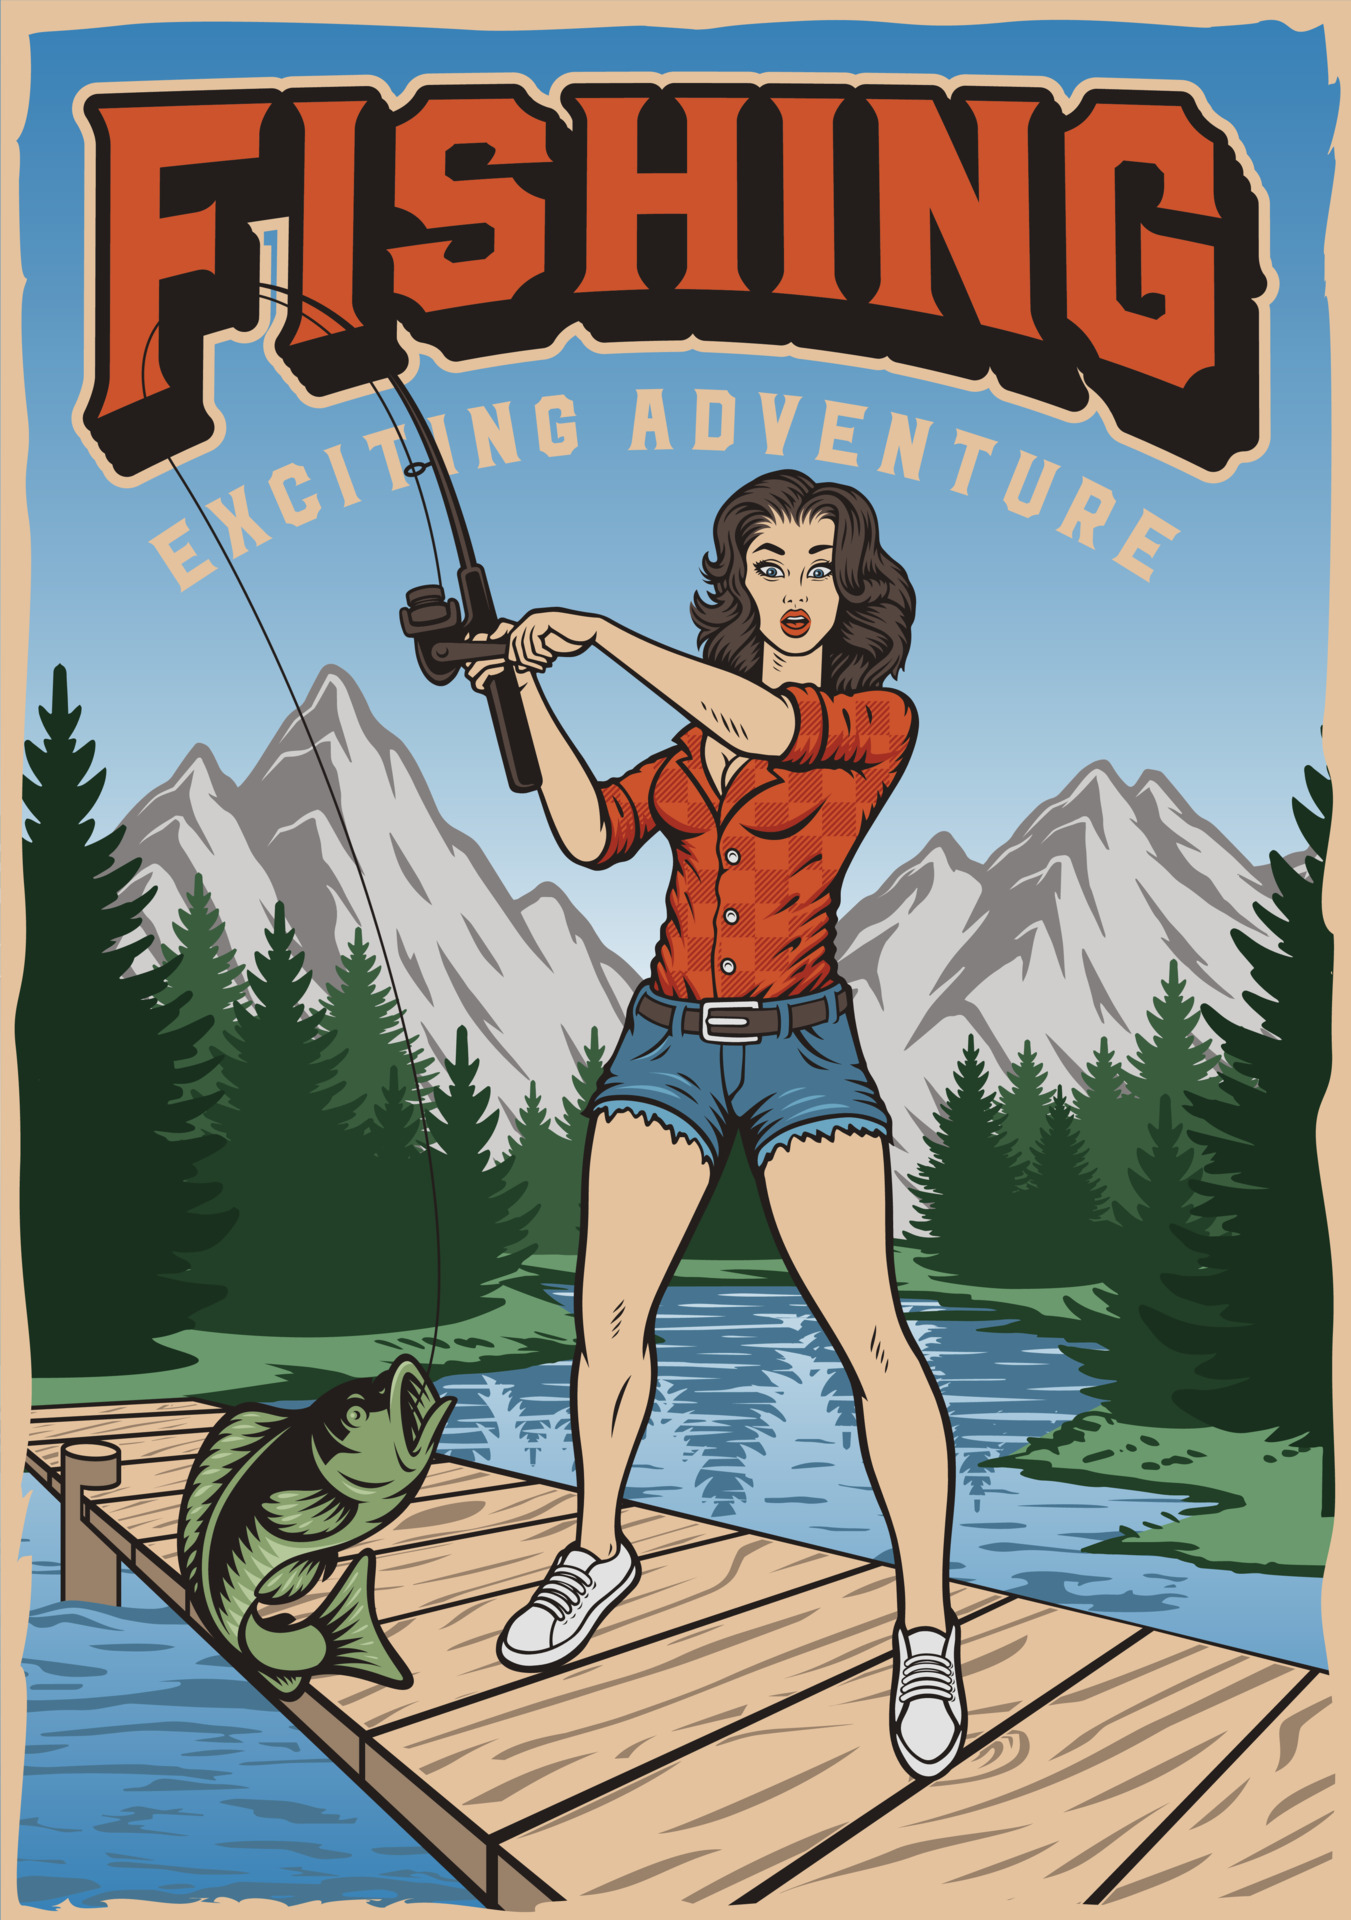 https://static.vecteezy.com/system/resources/previews/019/187/811/original/pin-up-girl-fishing-poster-in-vintage-style-vector.jpg